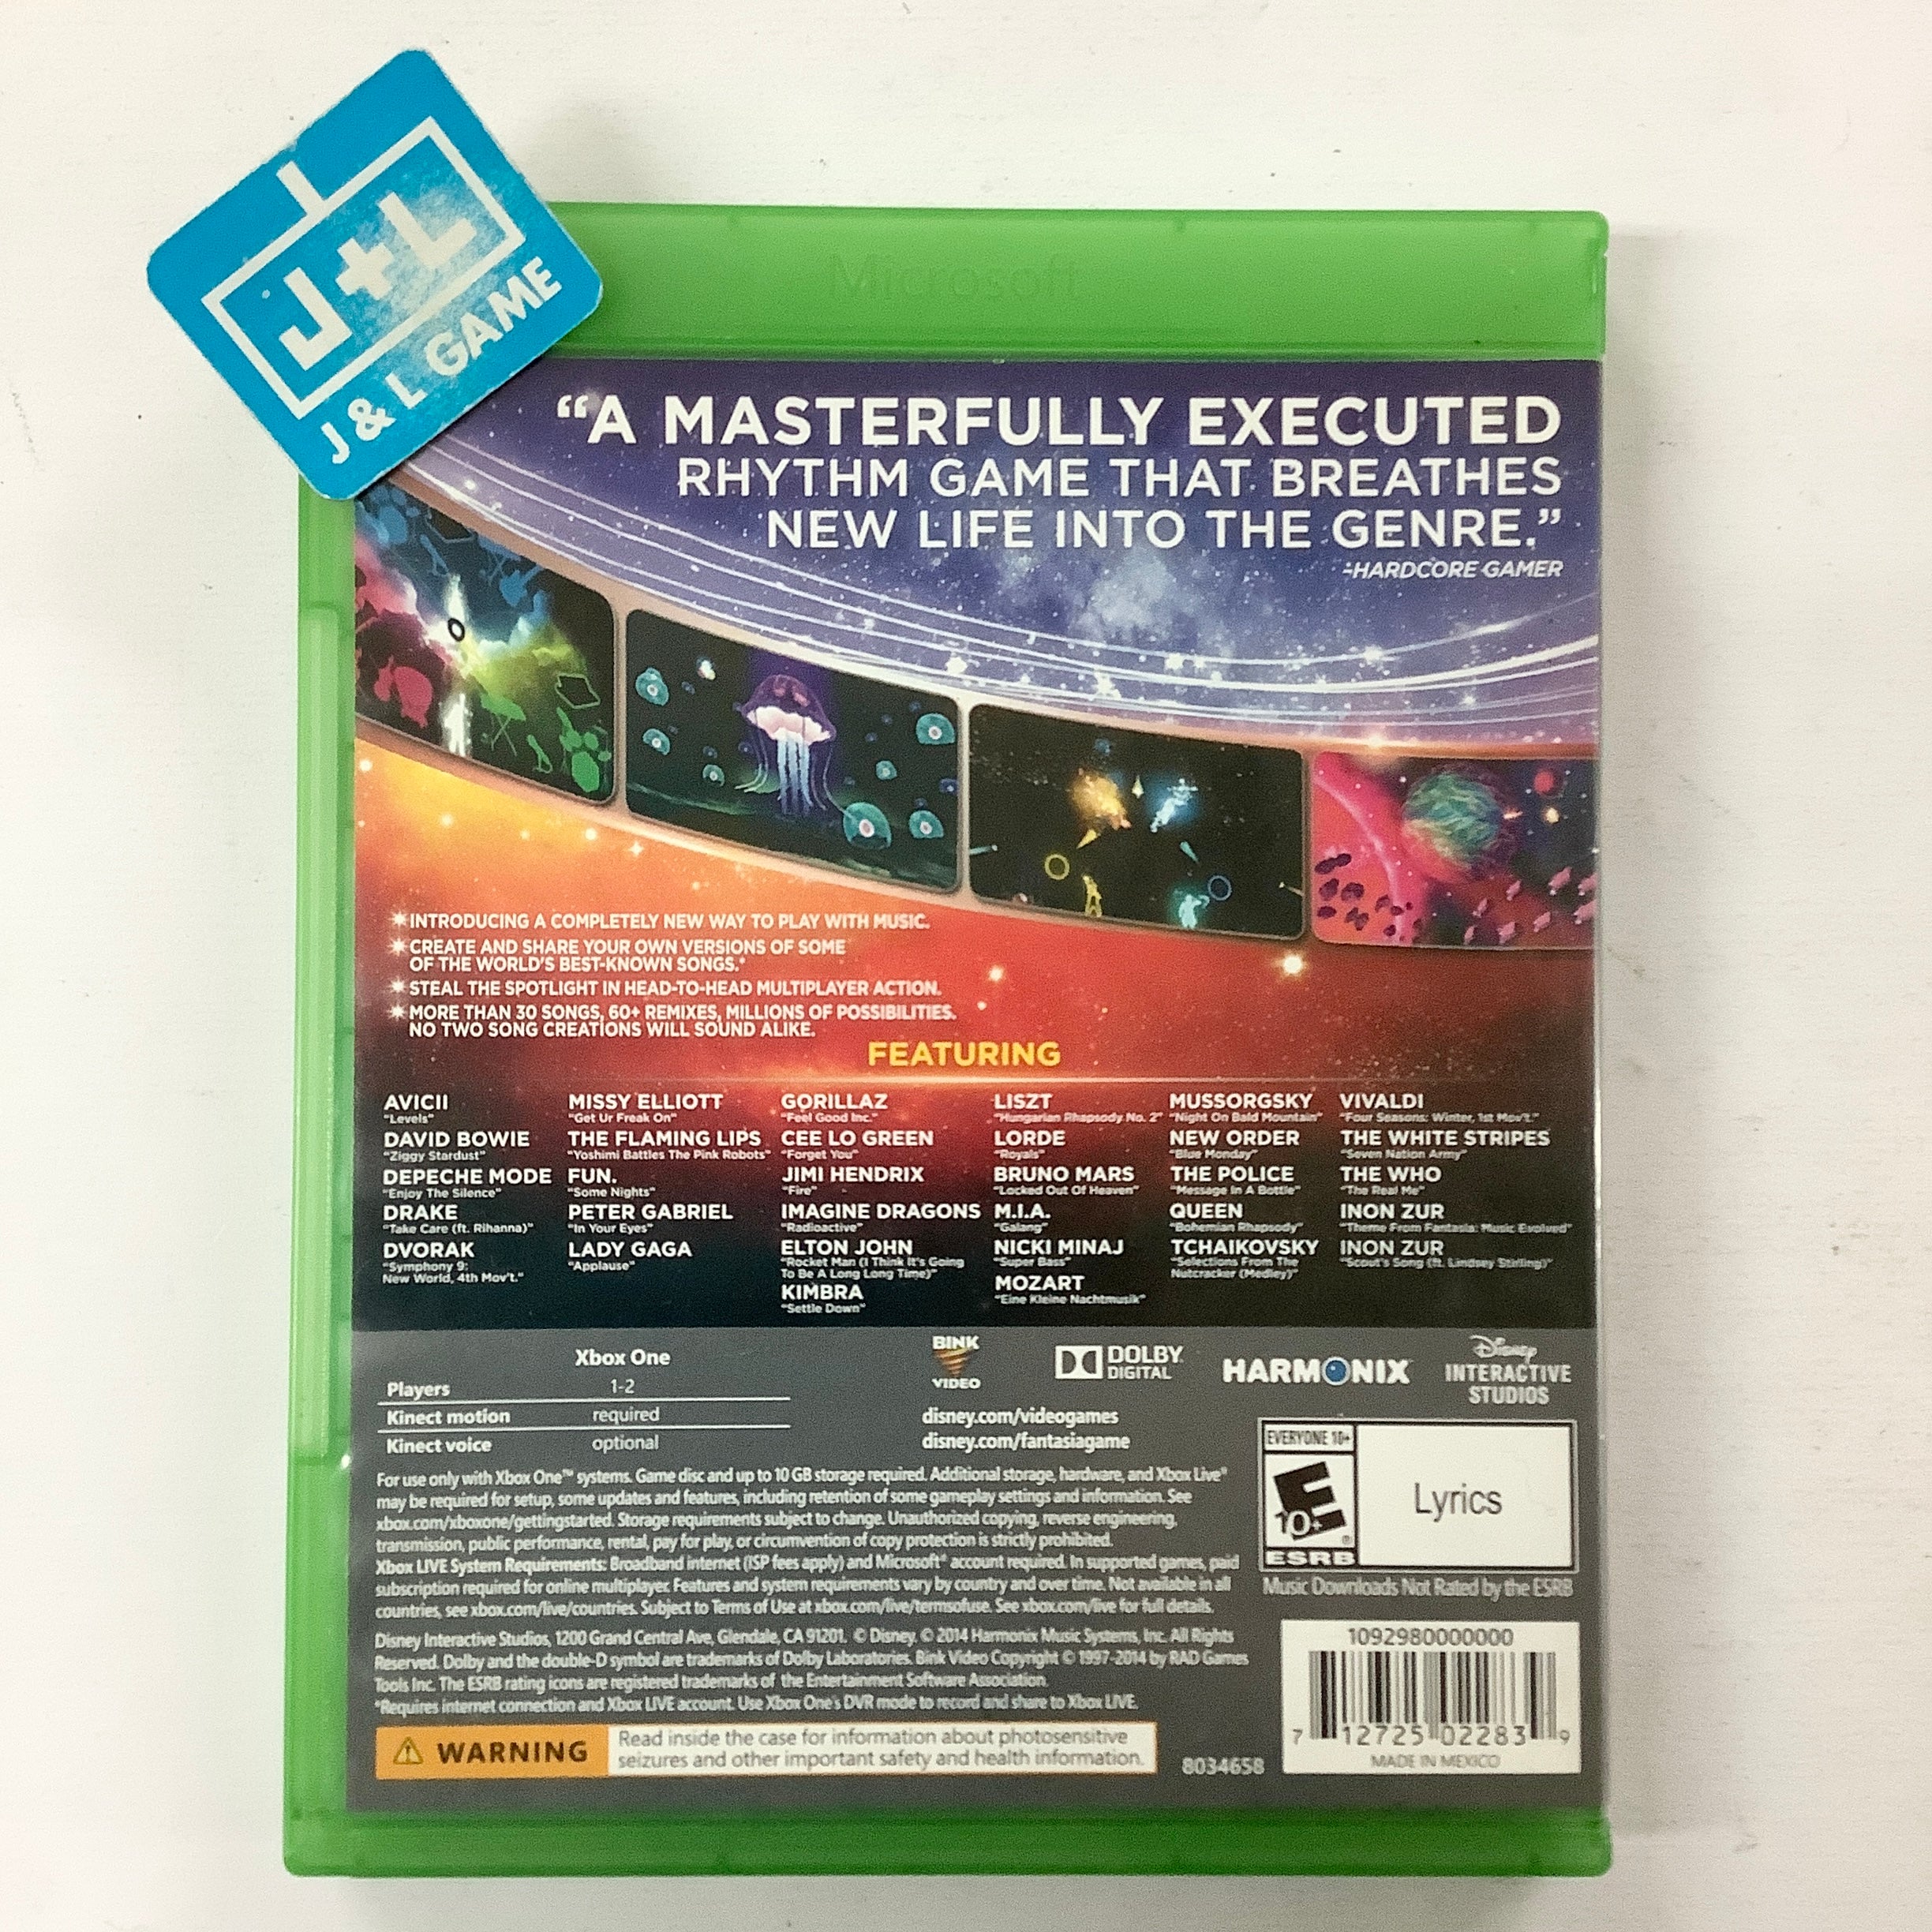 Disney Fantasia: Music Evolved (Kinect Required) - (XB1) Xbox One [Pre-Owned] Video Games Disney Interactive Studios   